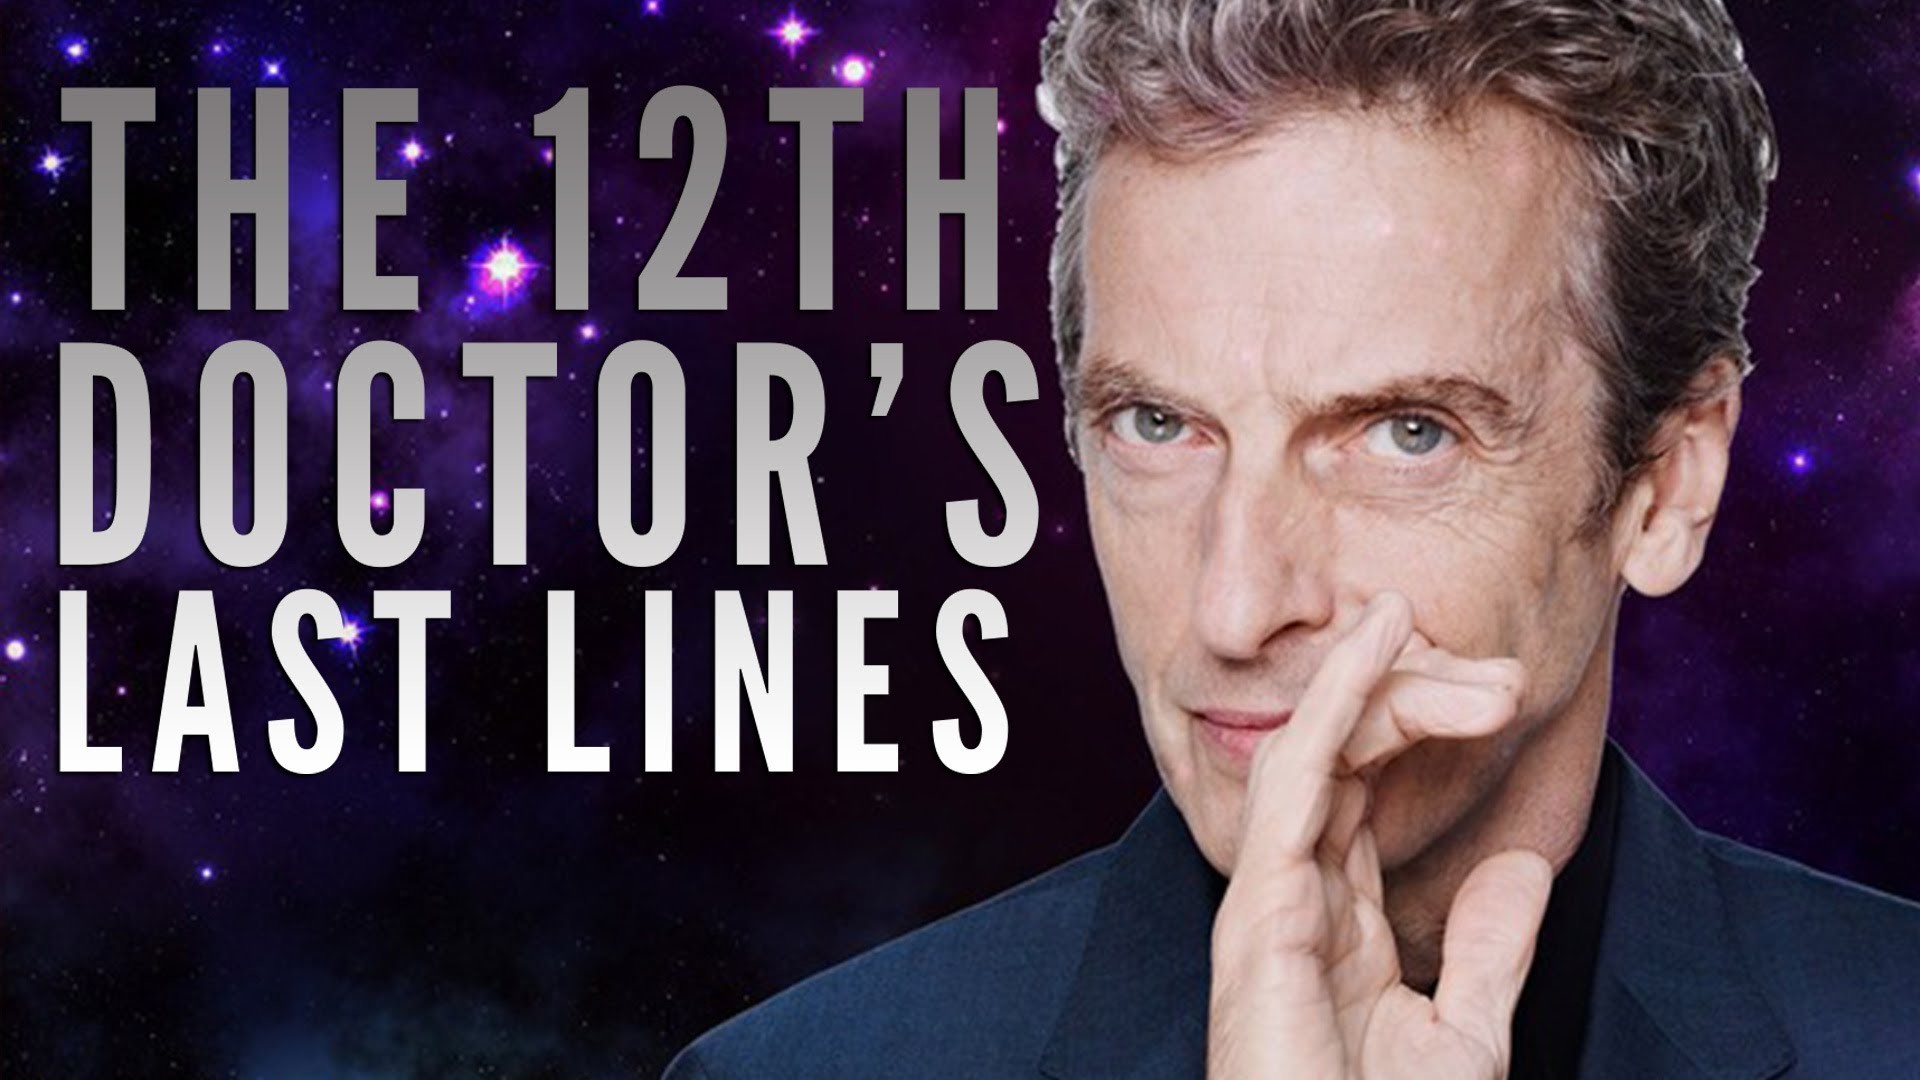 1920x1080 Doctor Who the 12th Doctors last lines. Peter Capaldi regenerates